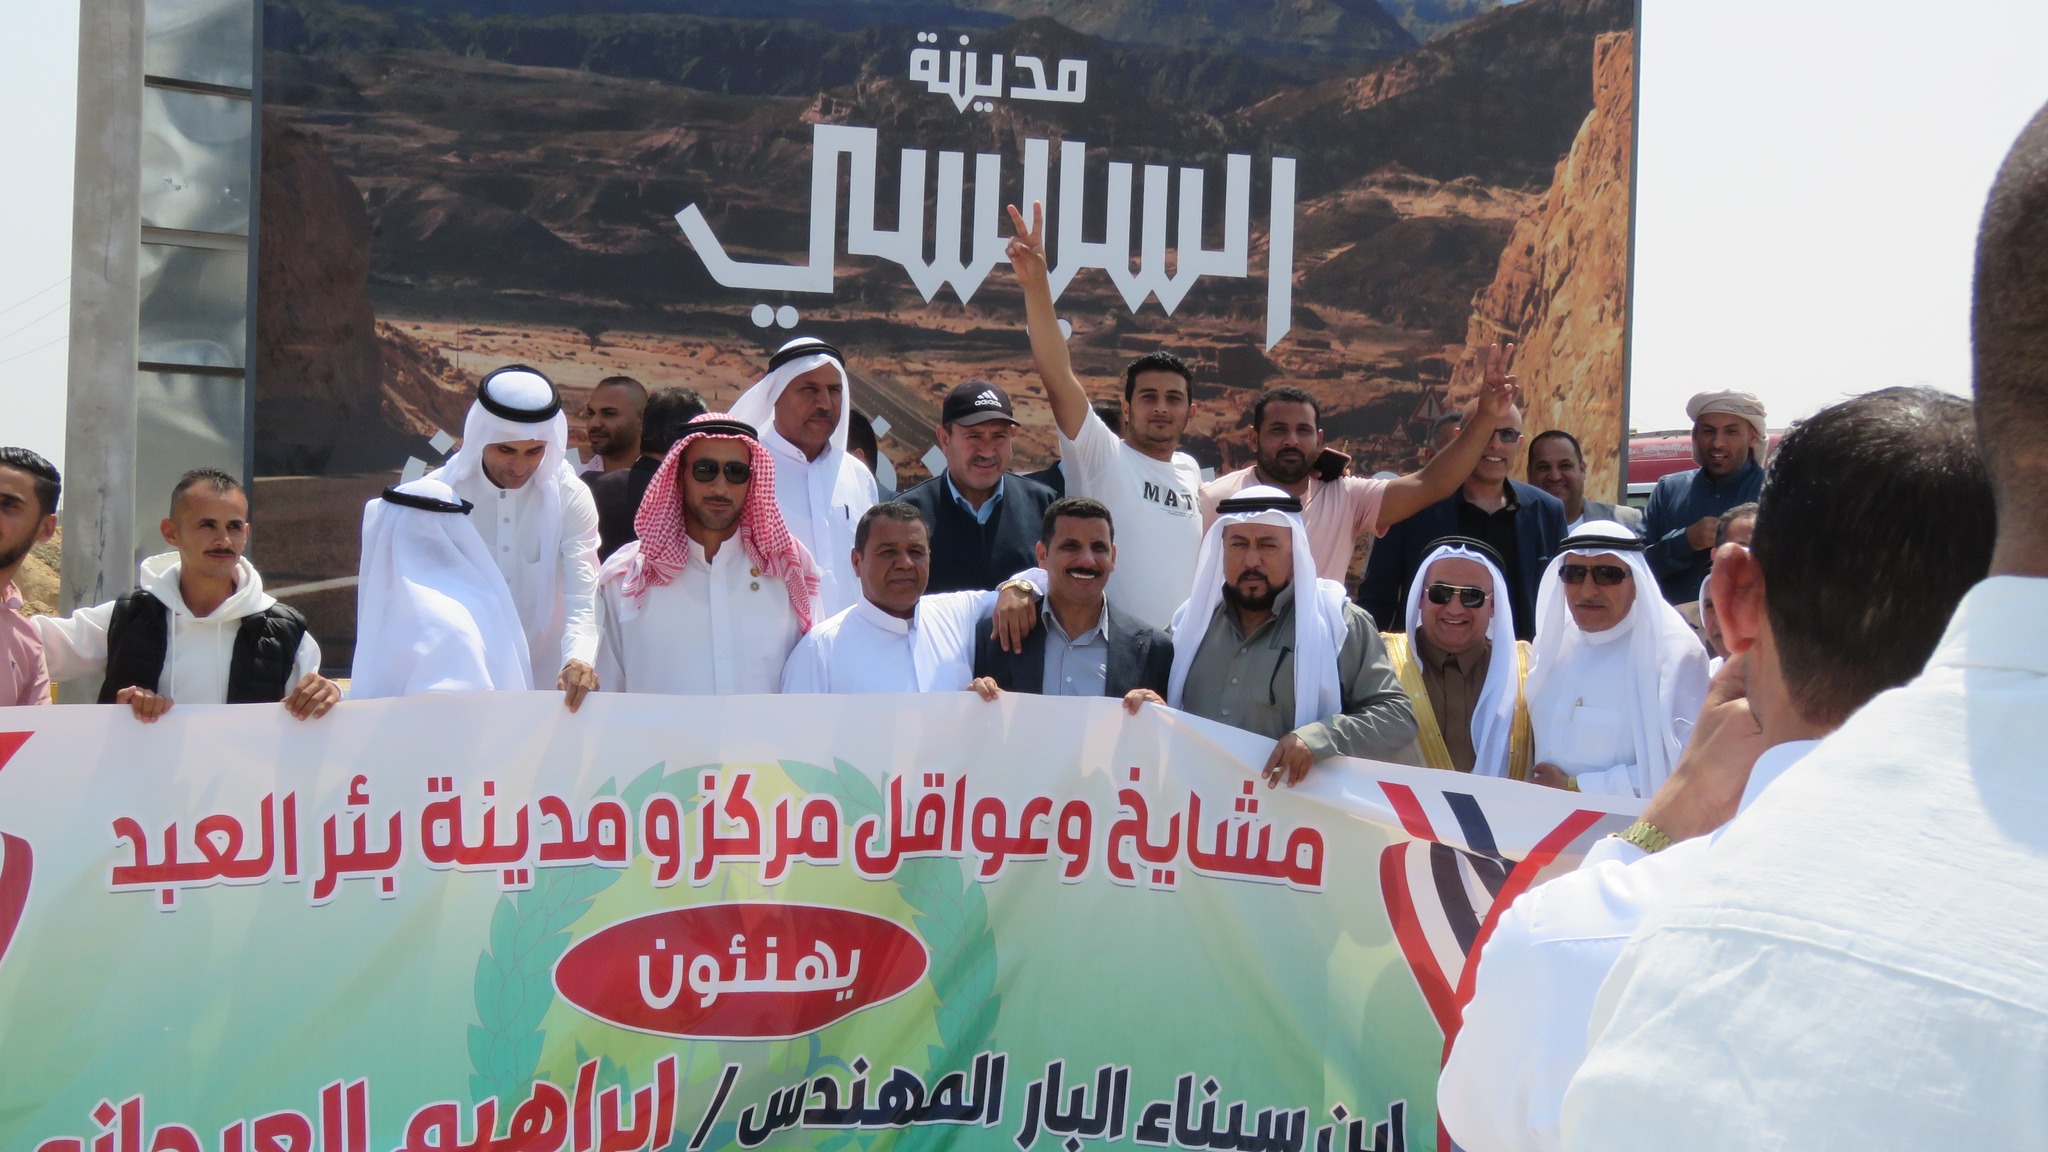 Sinai Bedouin figures carry a banner congratulating Organi for the new city, in front of a poster titled 'Sisi City', 1 May 2024 (Photo supplied to MEE)